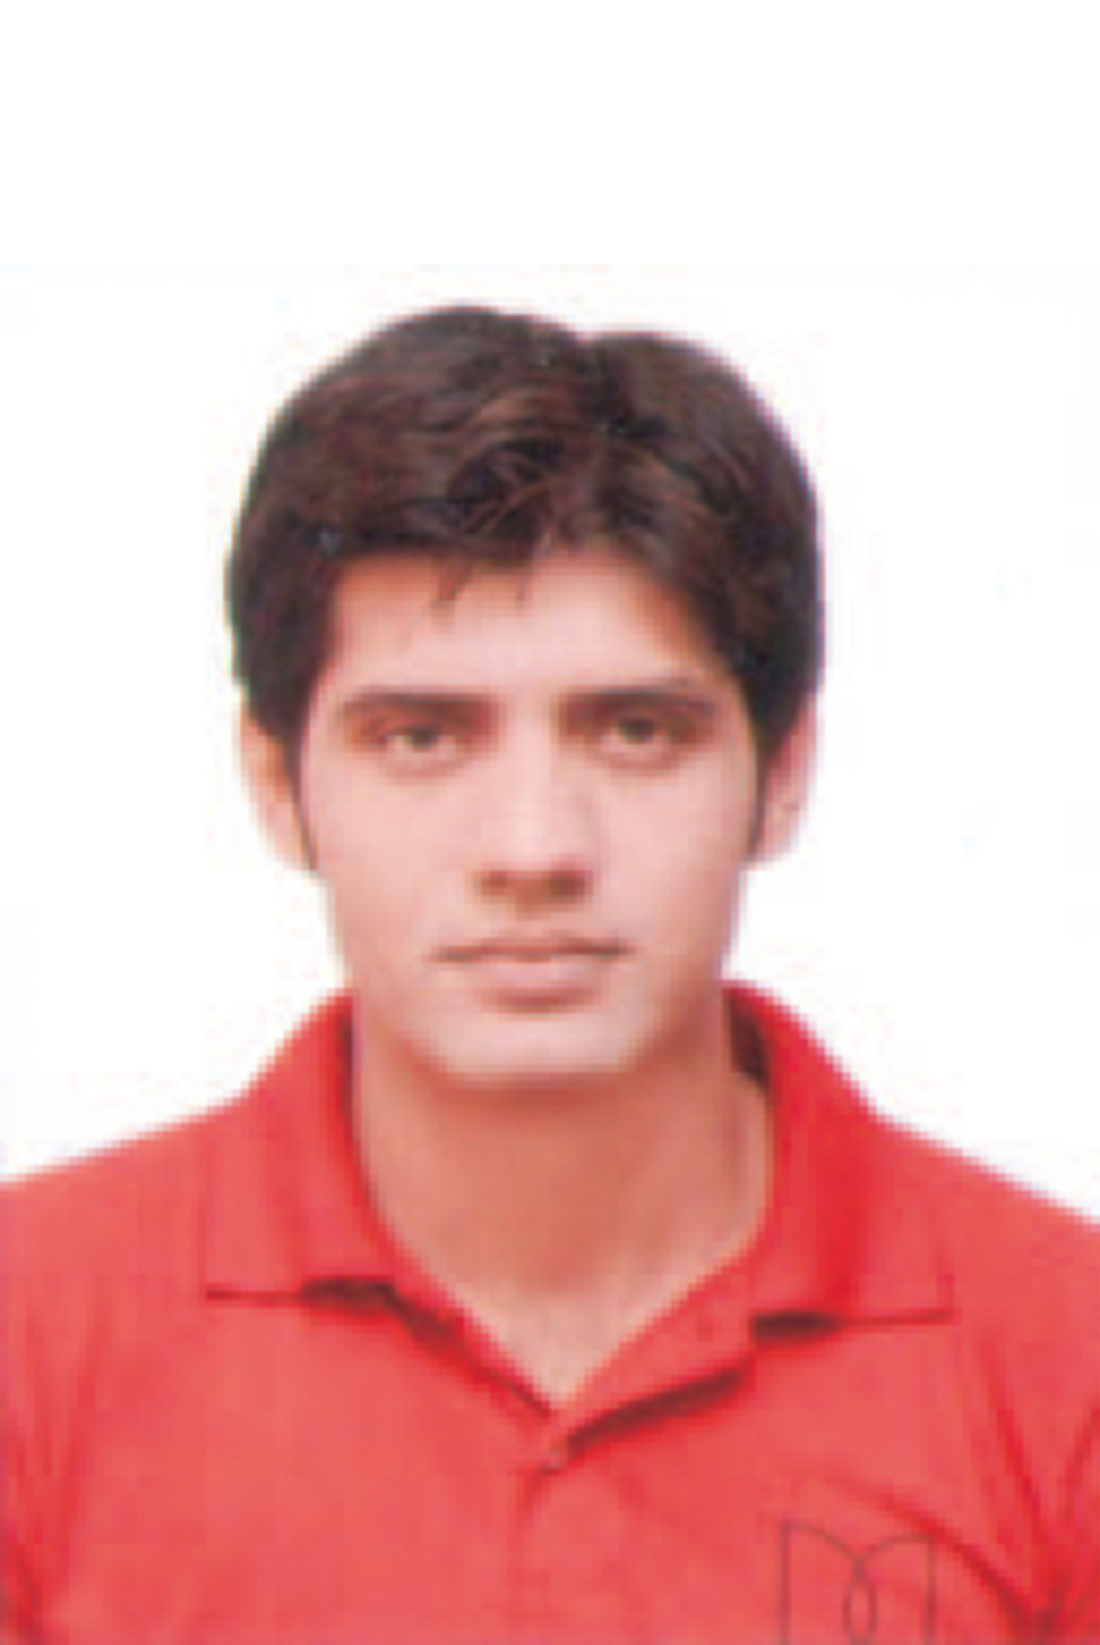 Anand Kumar securing Rank 1 in the CSIR NET Life Sciences Exam 2013